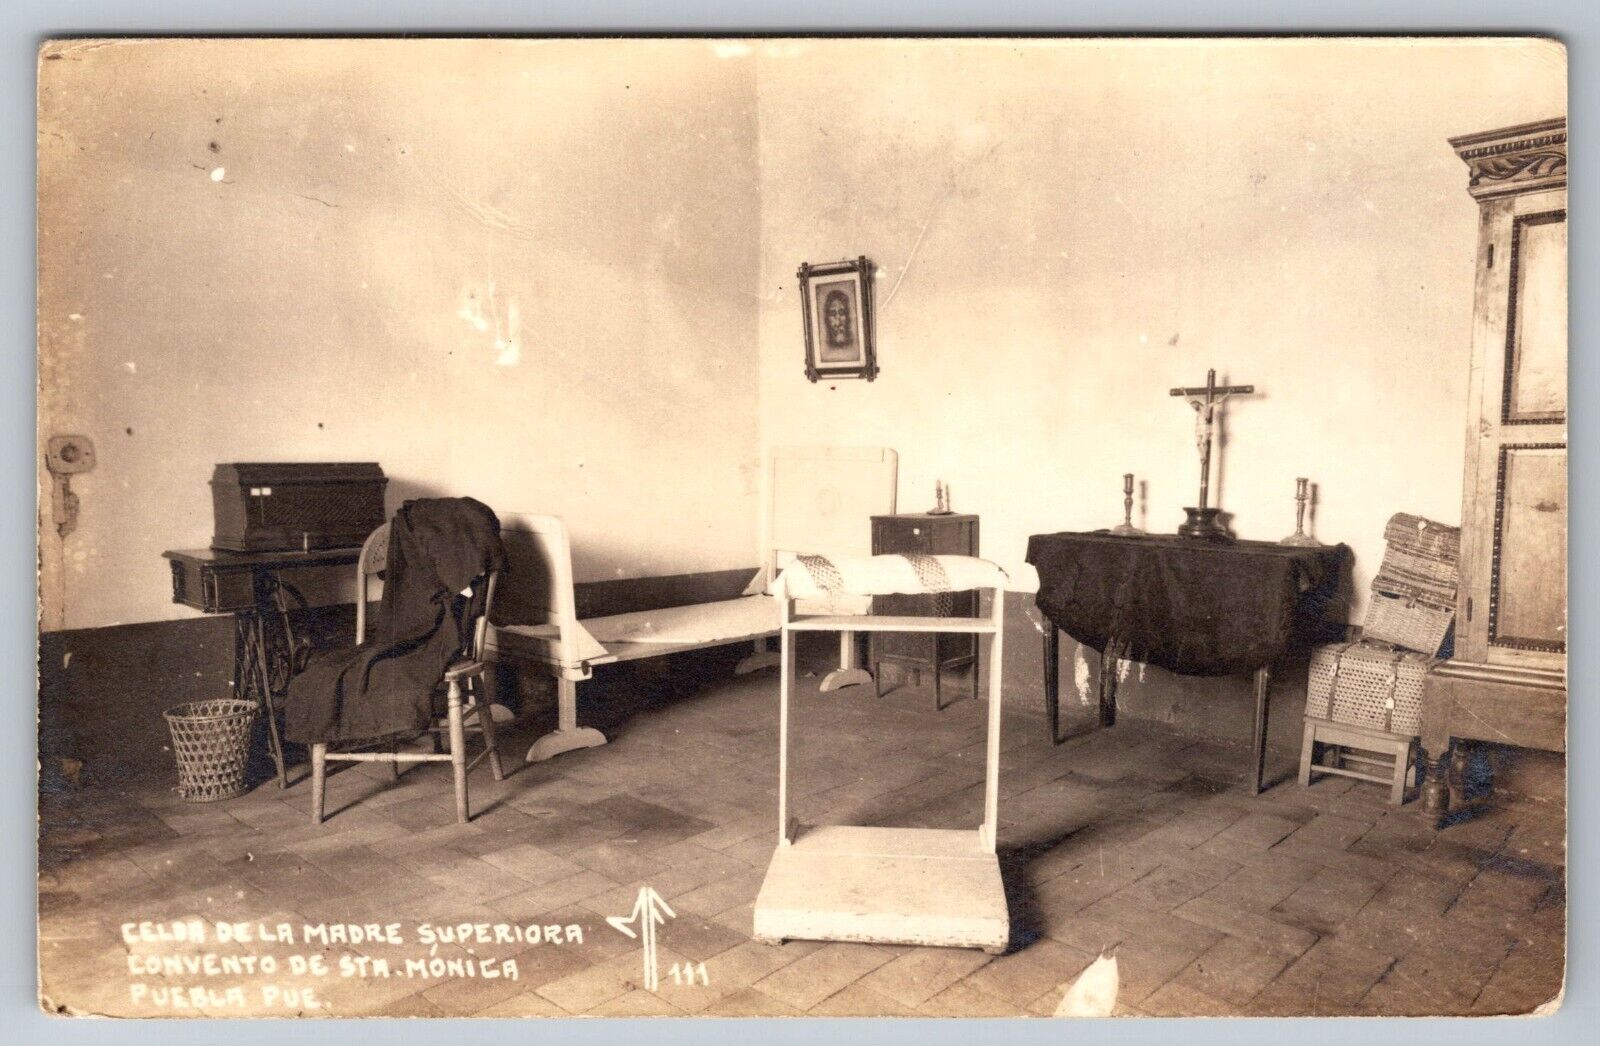 Cell of the Mother Superior. St. Monica Convent. Mexico Real Photo Postcard RPPC